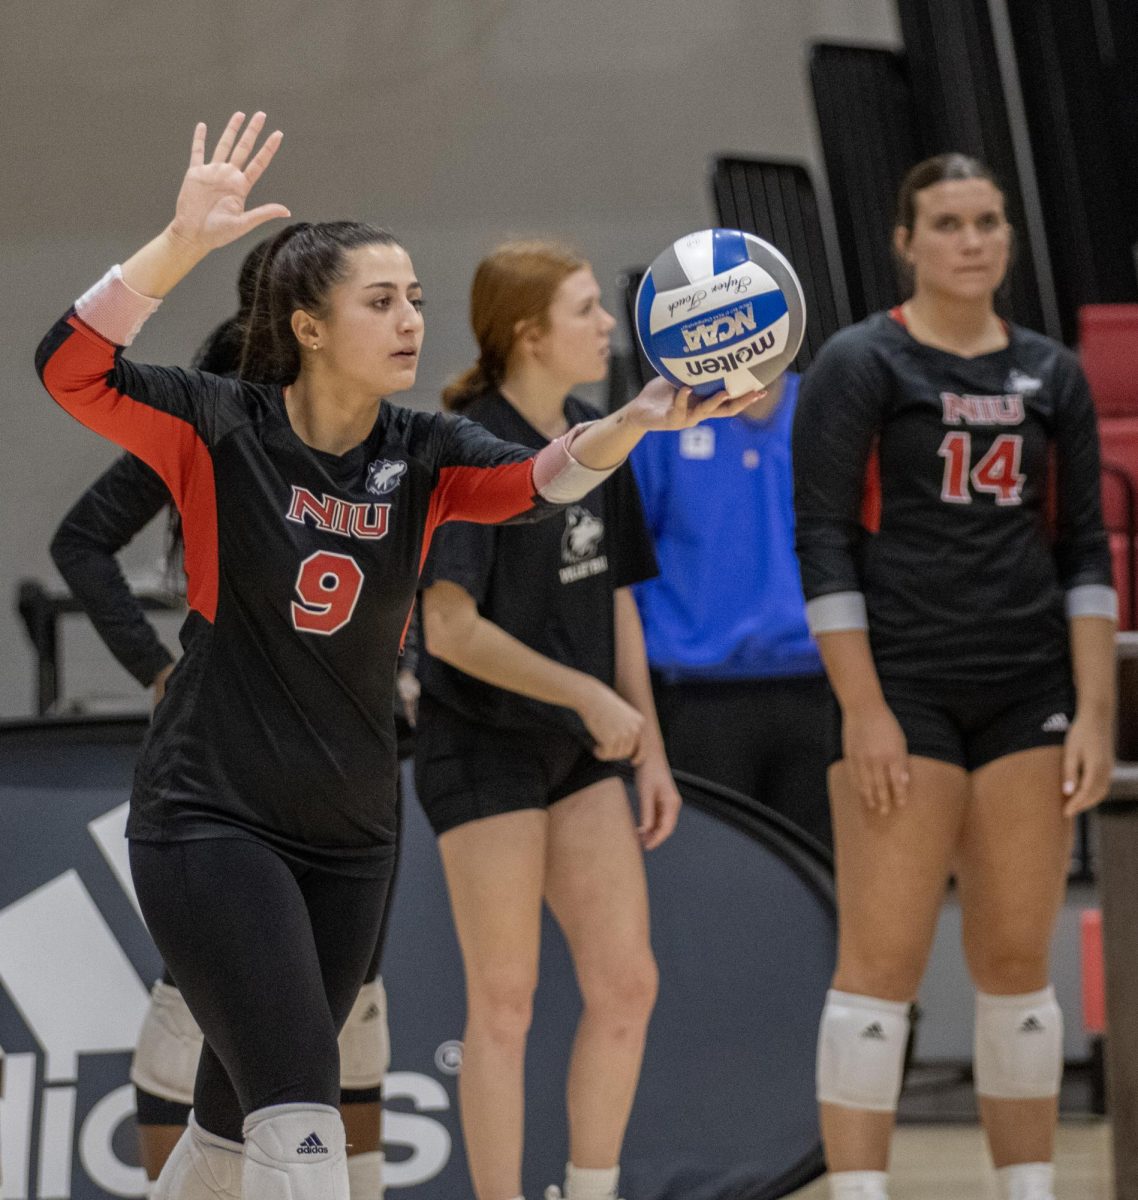 NIU defensive specialist/libero Jada Cerniglia serves the ball during Friday’s MAC battle between the Huskies and the University of Akron Zips. NIU was undone in three sets to extend its losing streak to four matches. (Tim Dodge | Northern Star)